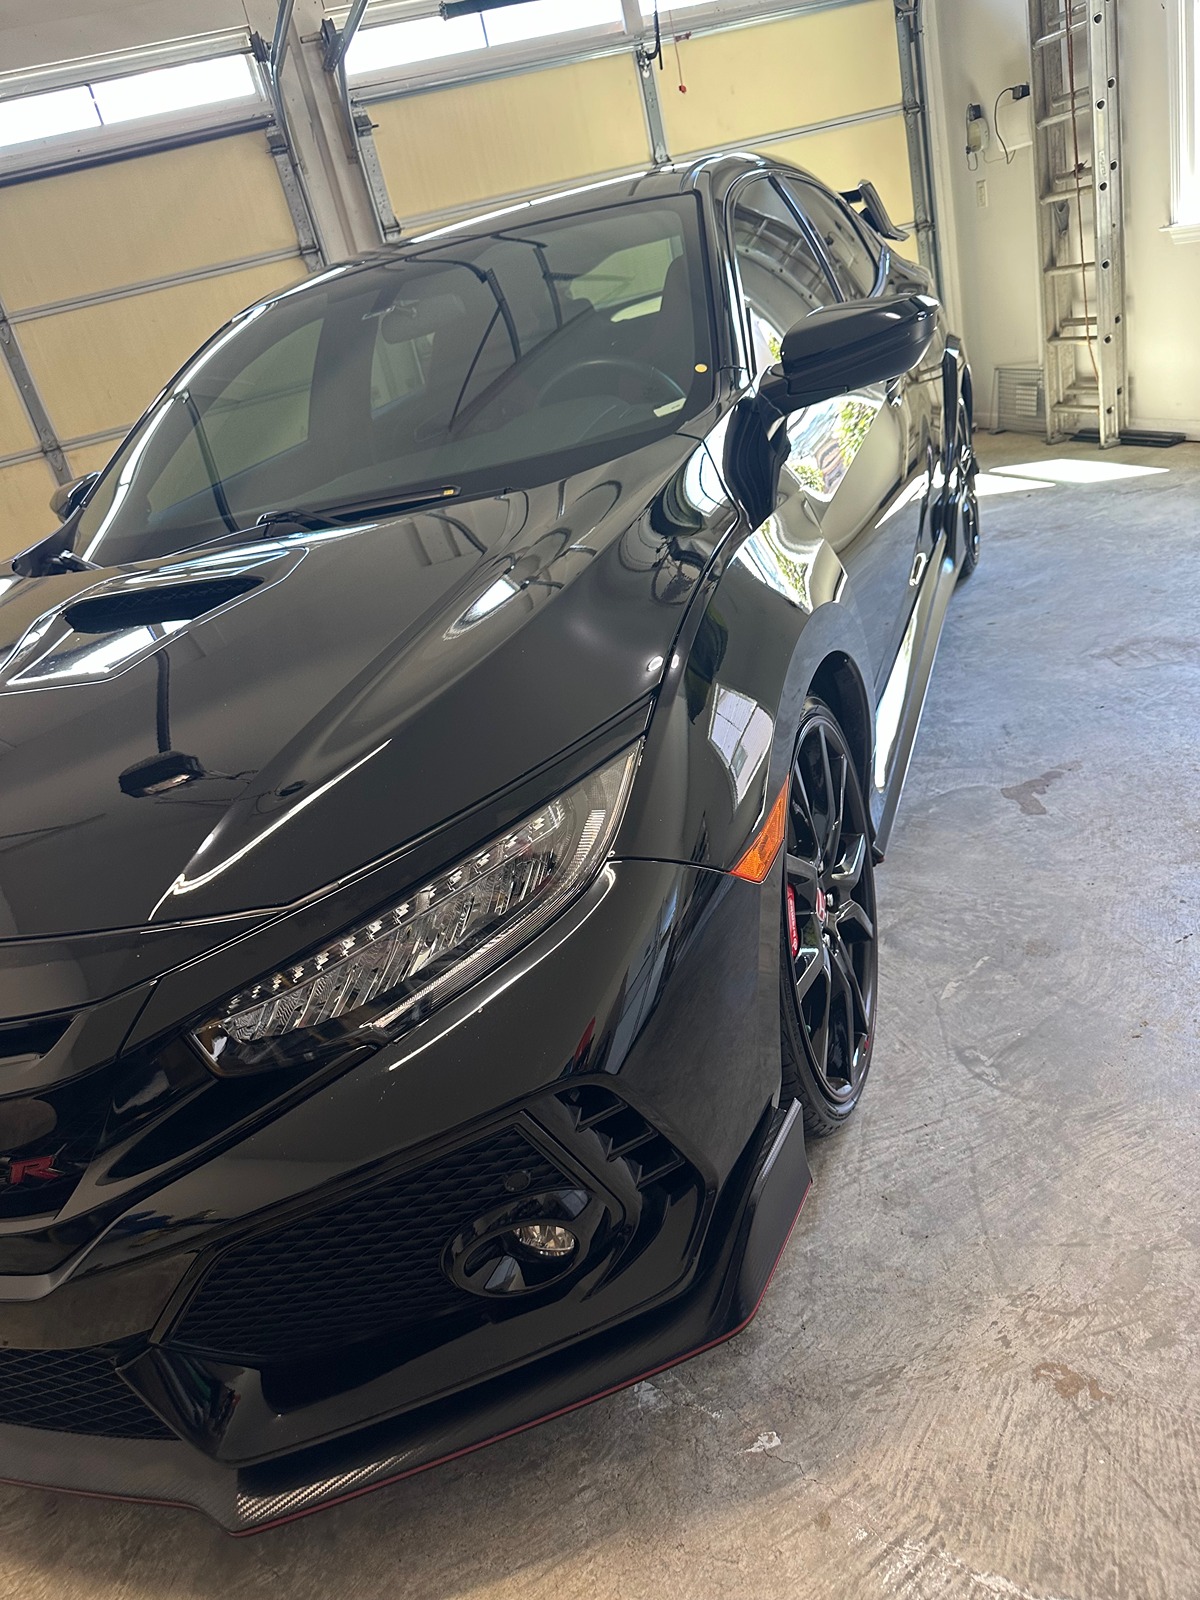 Honda Civic 10th gen Sold. 2019 Civic Type R for sale IMG_8214